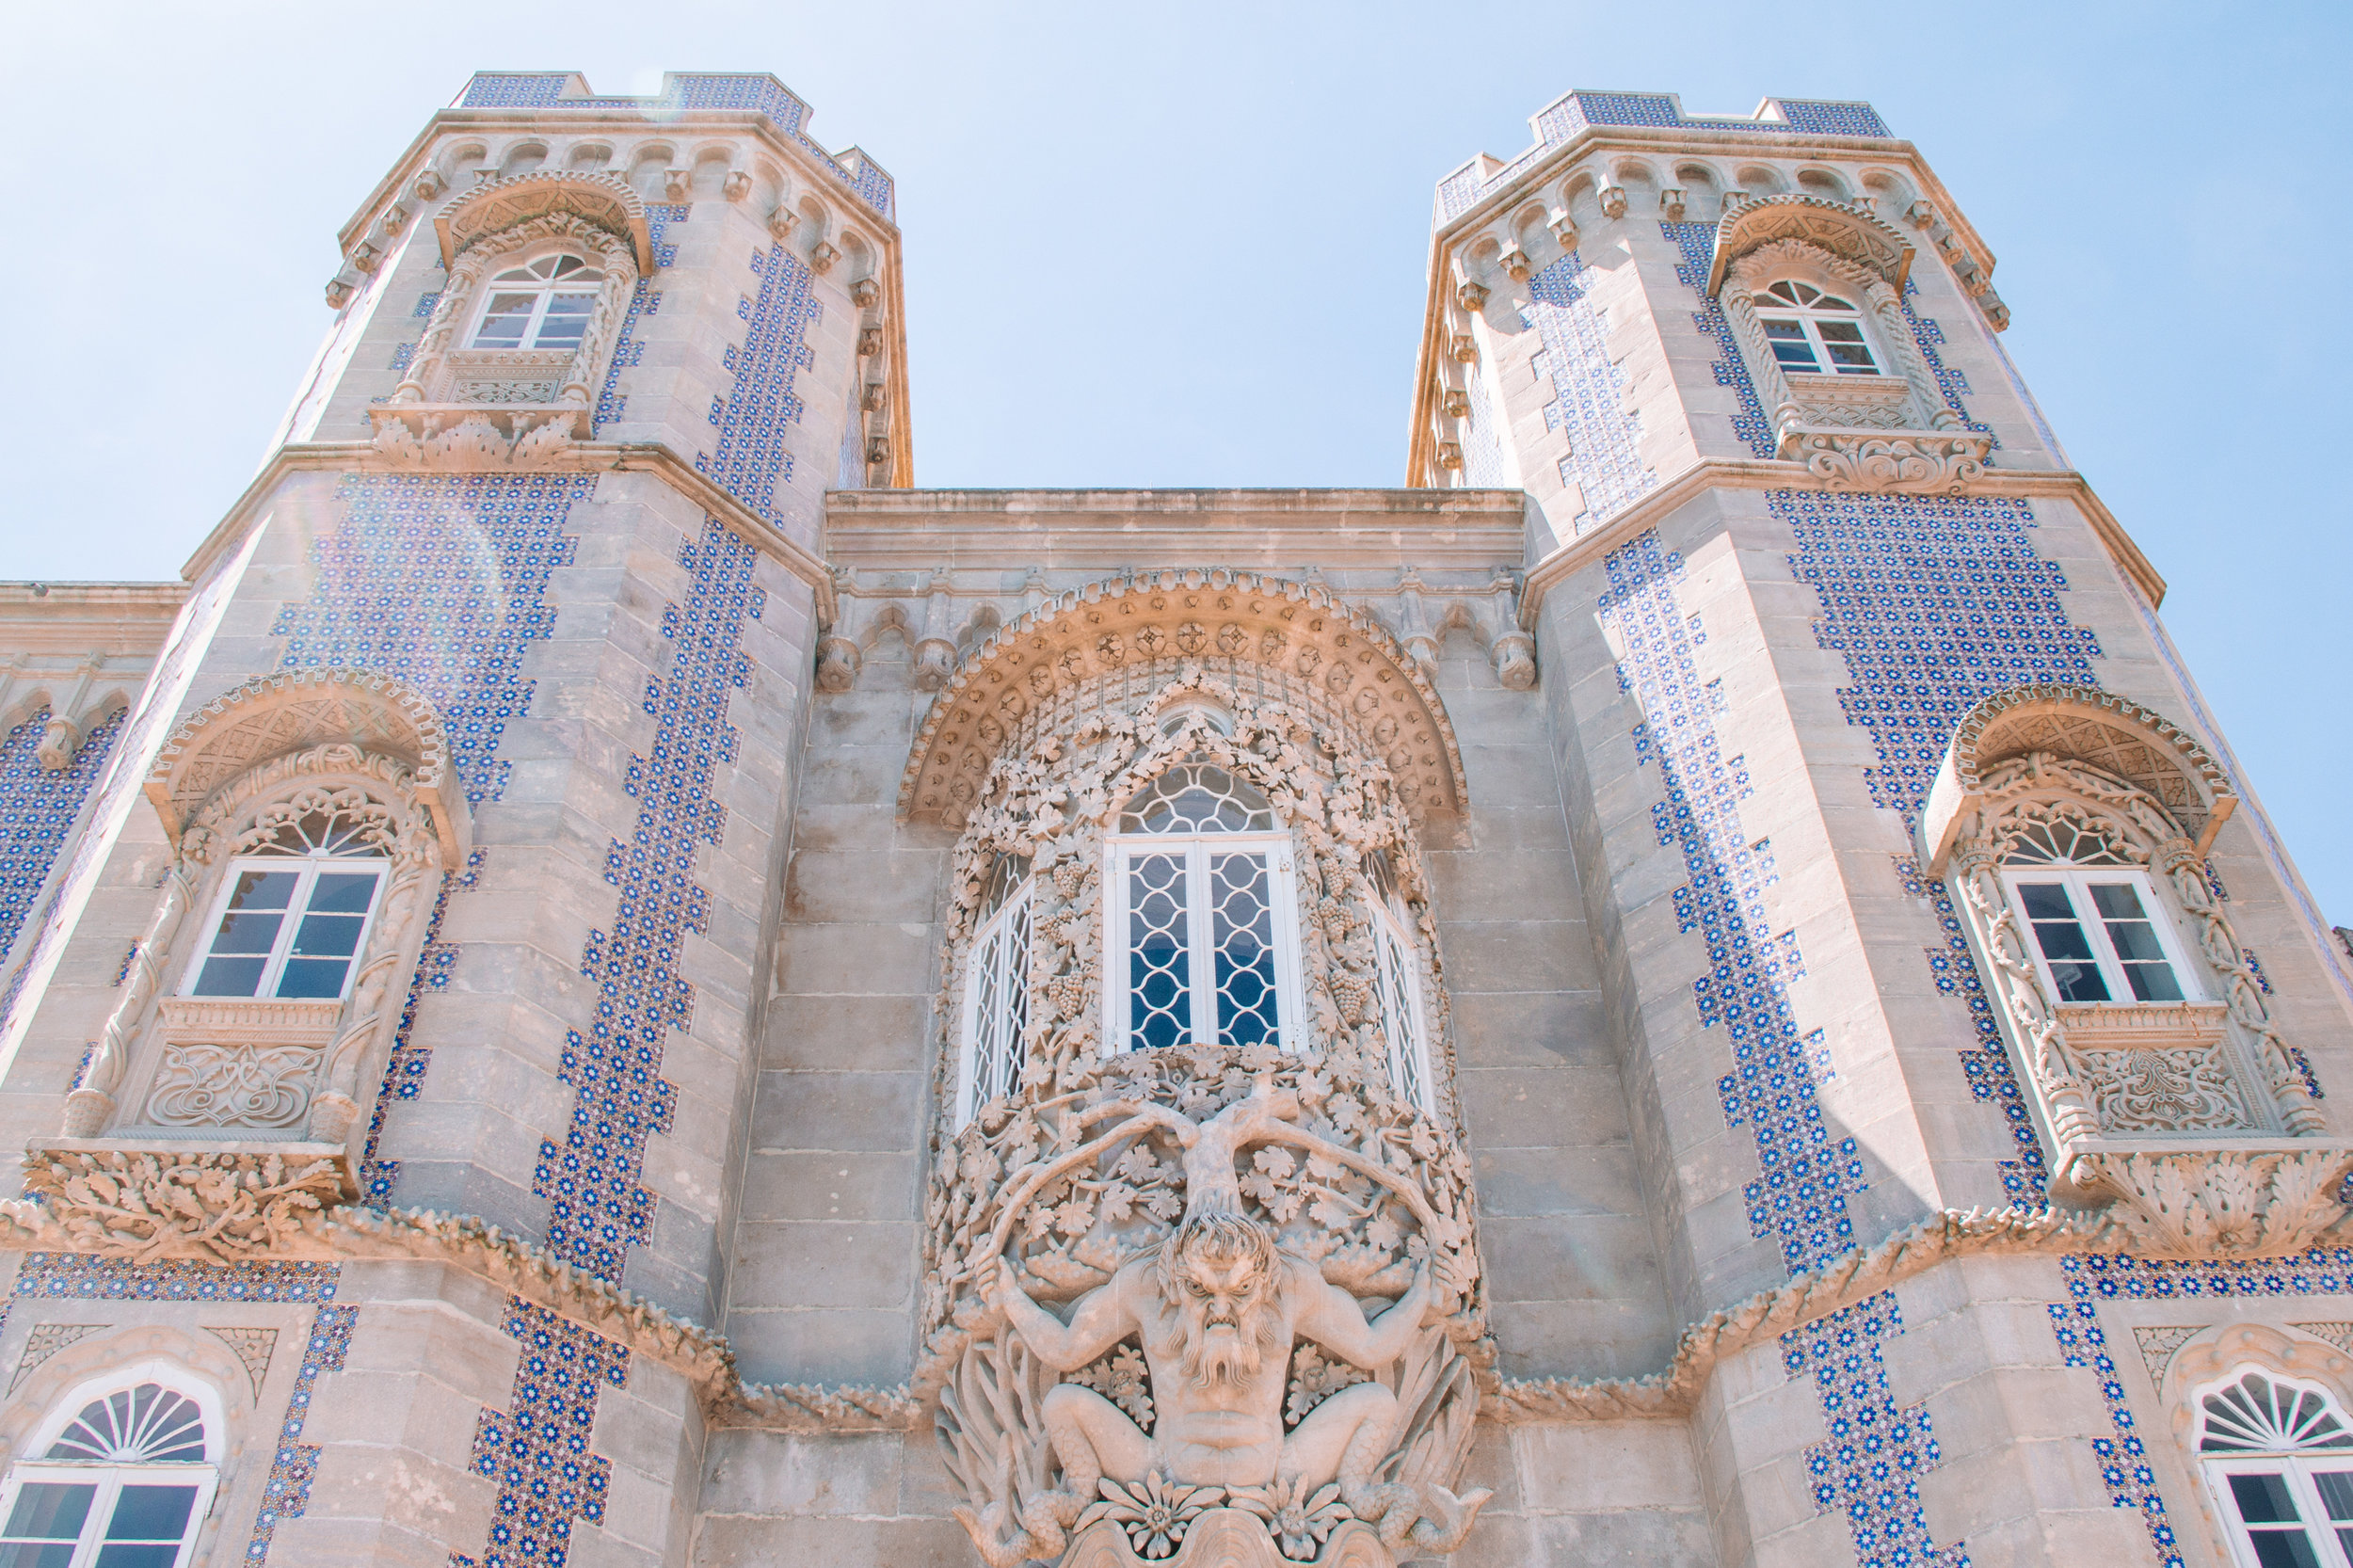 Tile covers the facade of the Pena Palace in Sintra Portugal